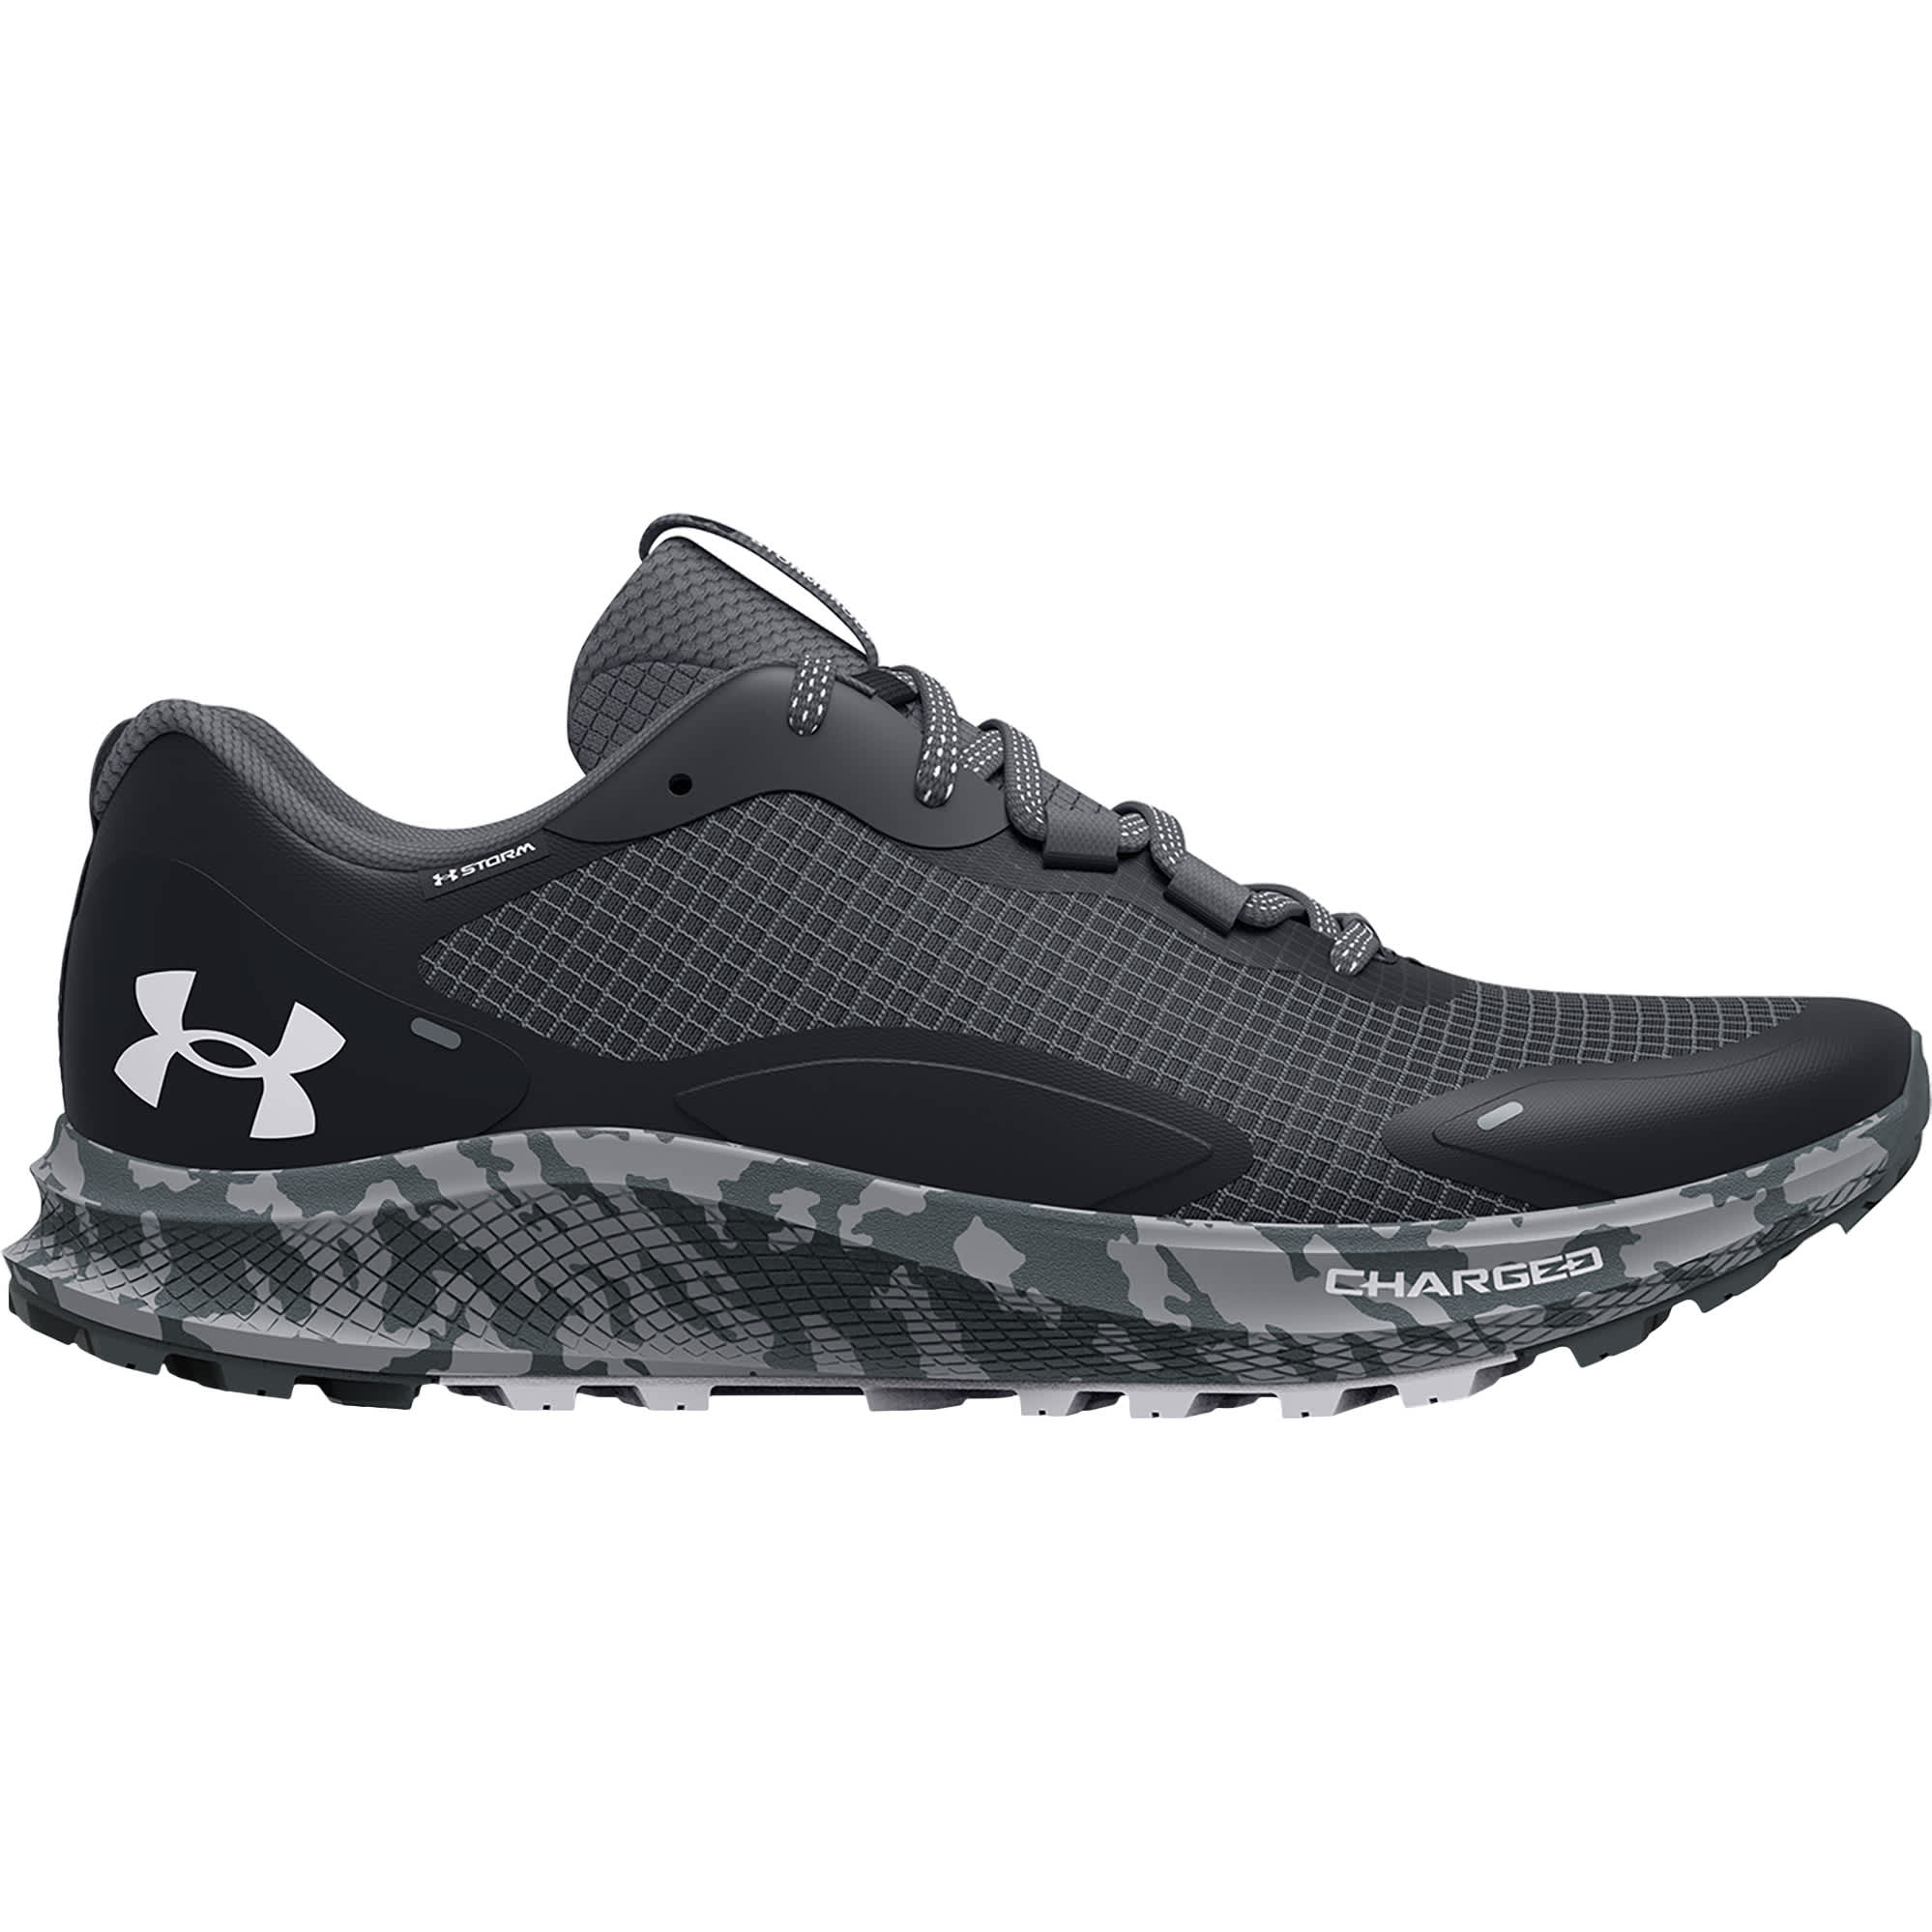 Buy Under Armour Running Shoes & Clothing Online Tagged SALE